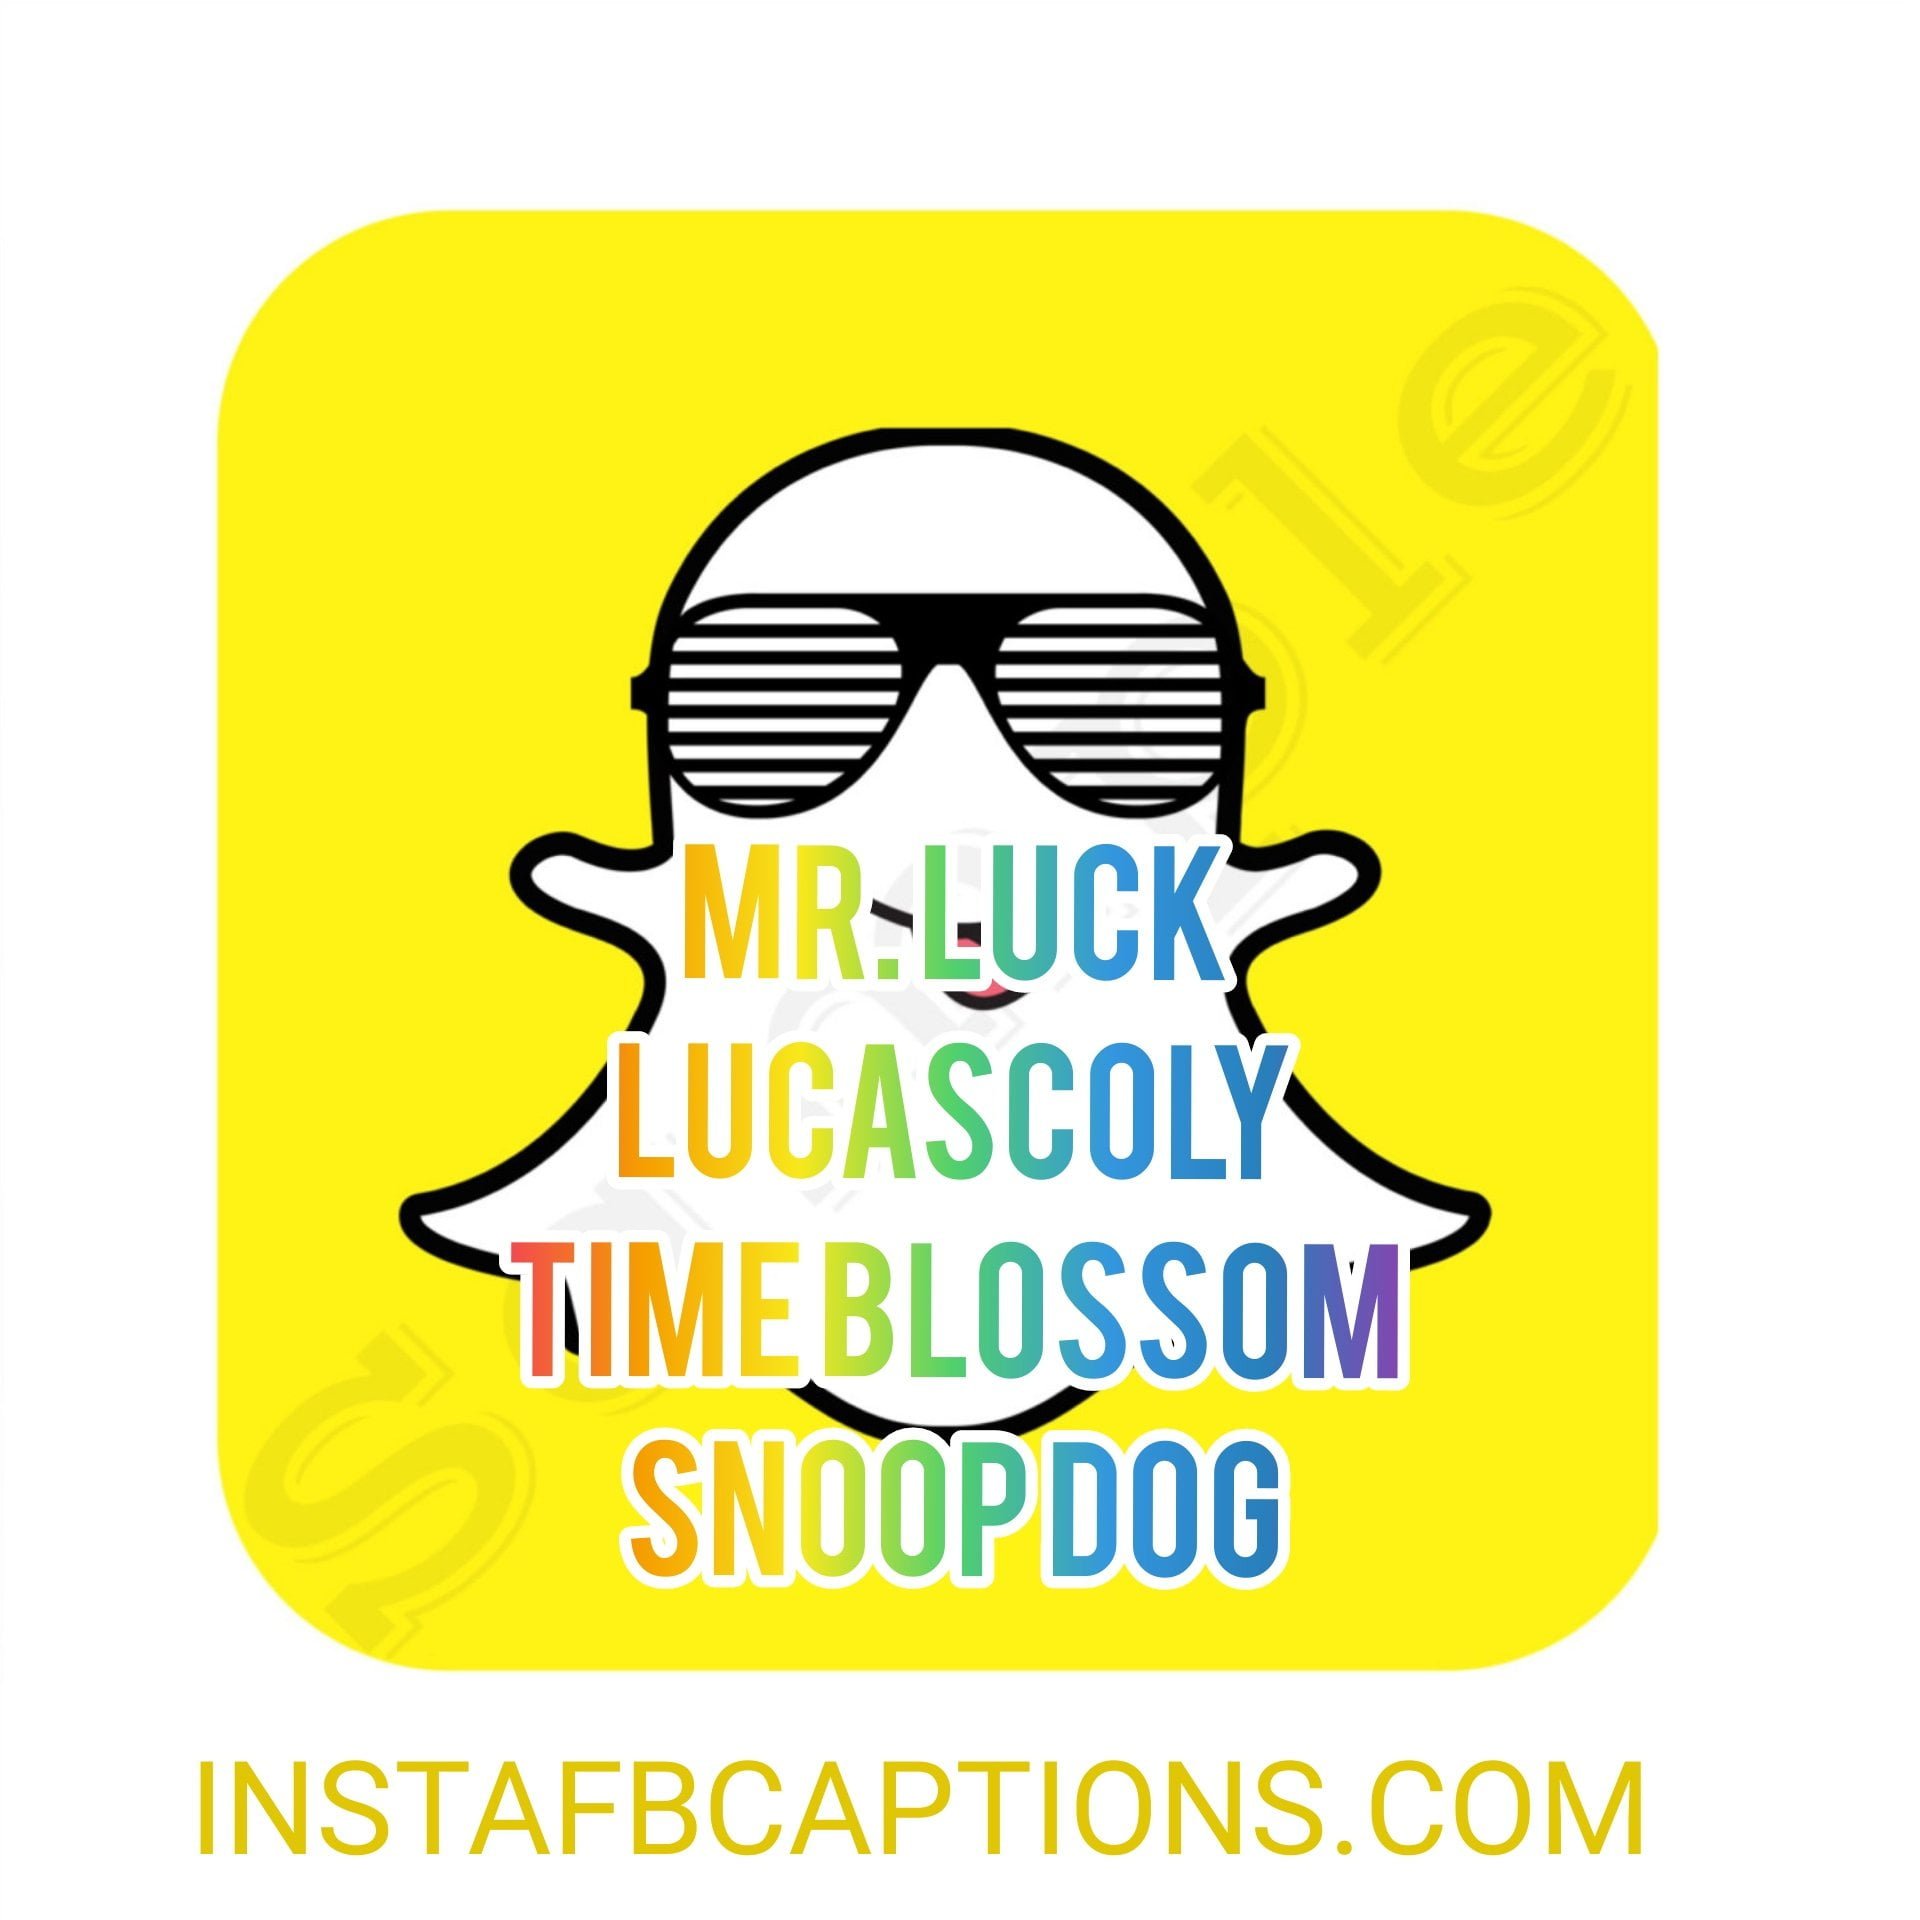 Cool Snapchat Names  - Cool snapchat names - 750+ Best SNAPCHAT NAME IDEAS for Guys &#038; Girls 2022